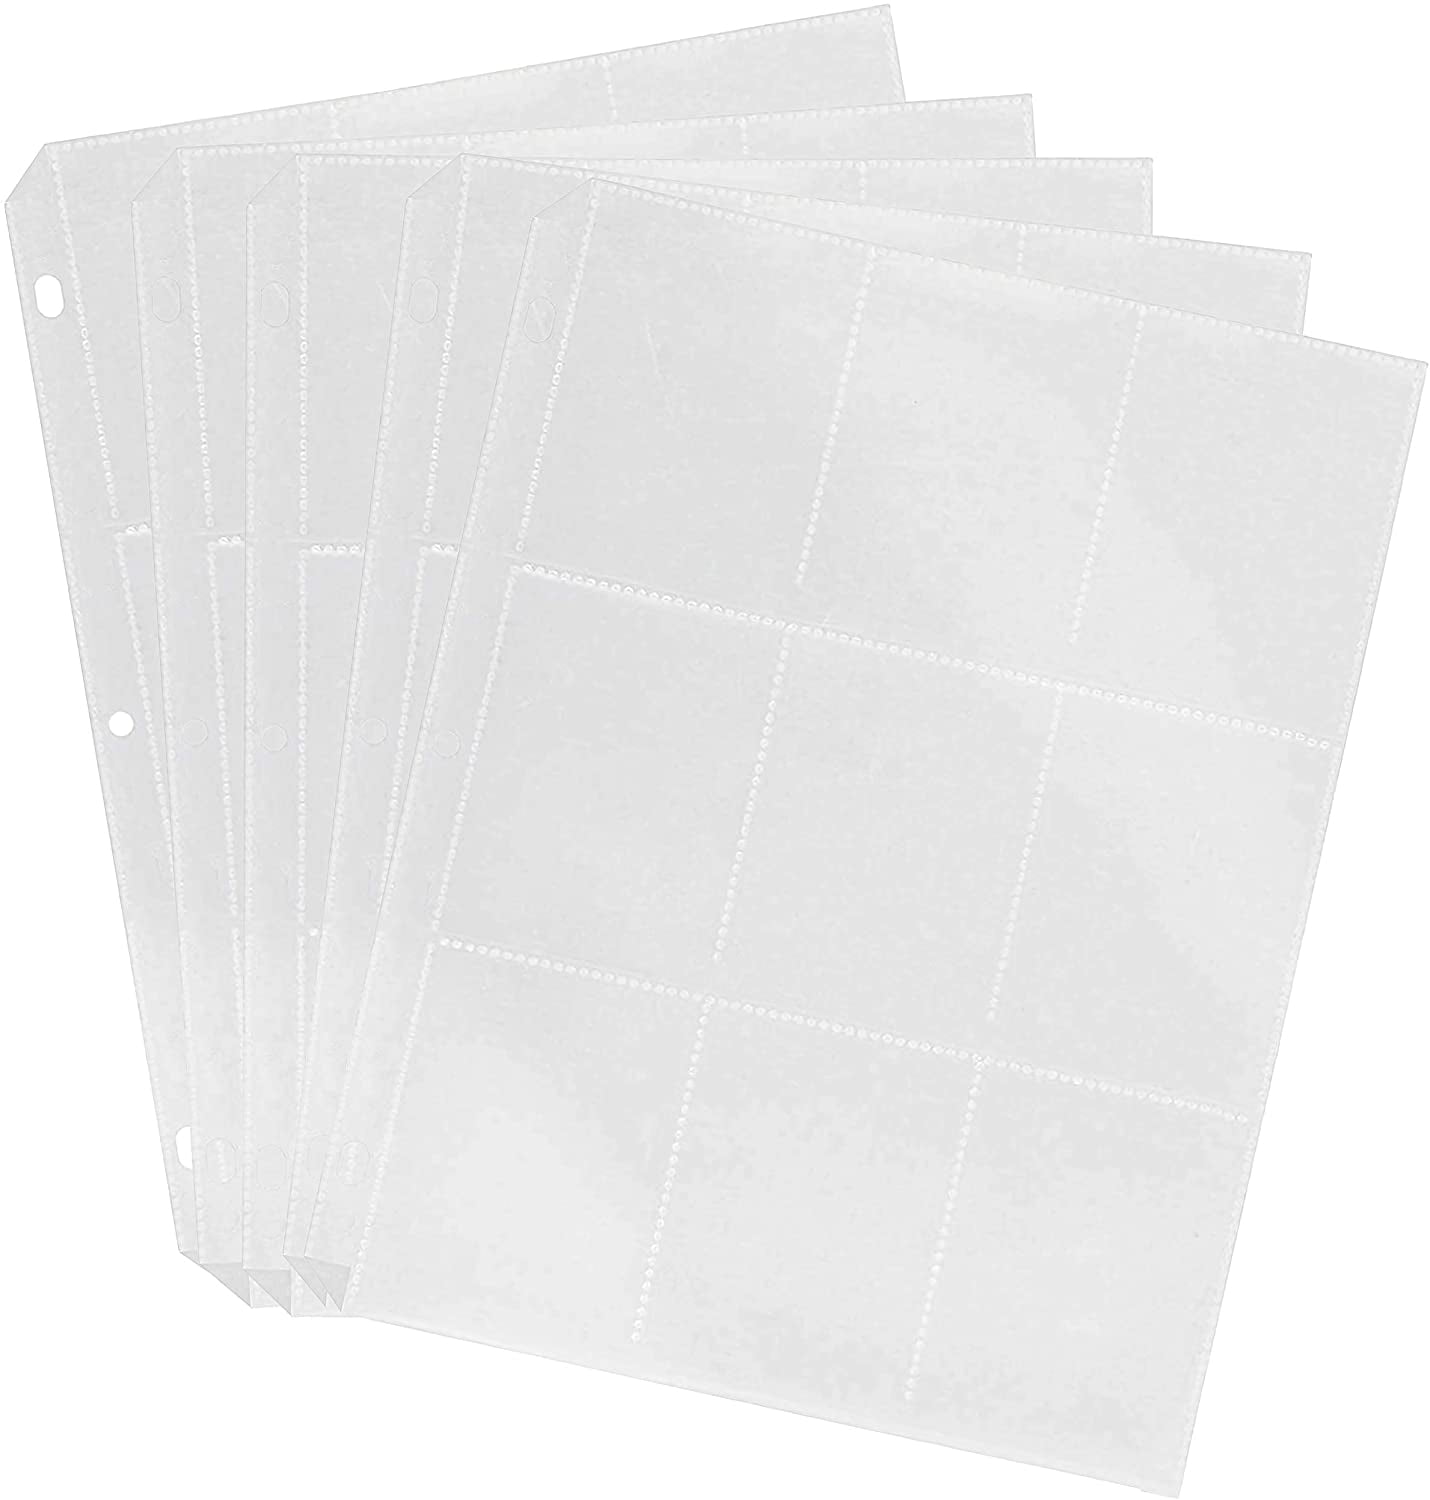 Box of 50 9 Pocket PRO Pages for Binder Baseball Cards Holder with Ultra Storage 